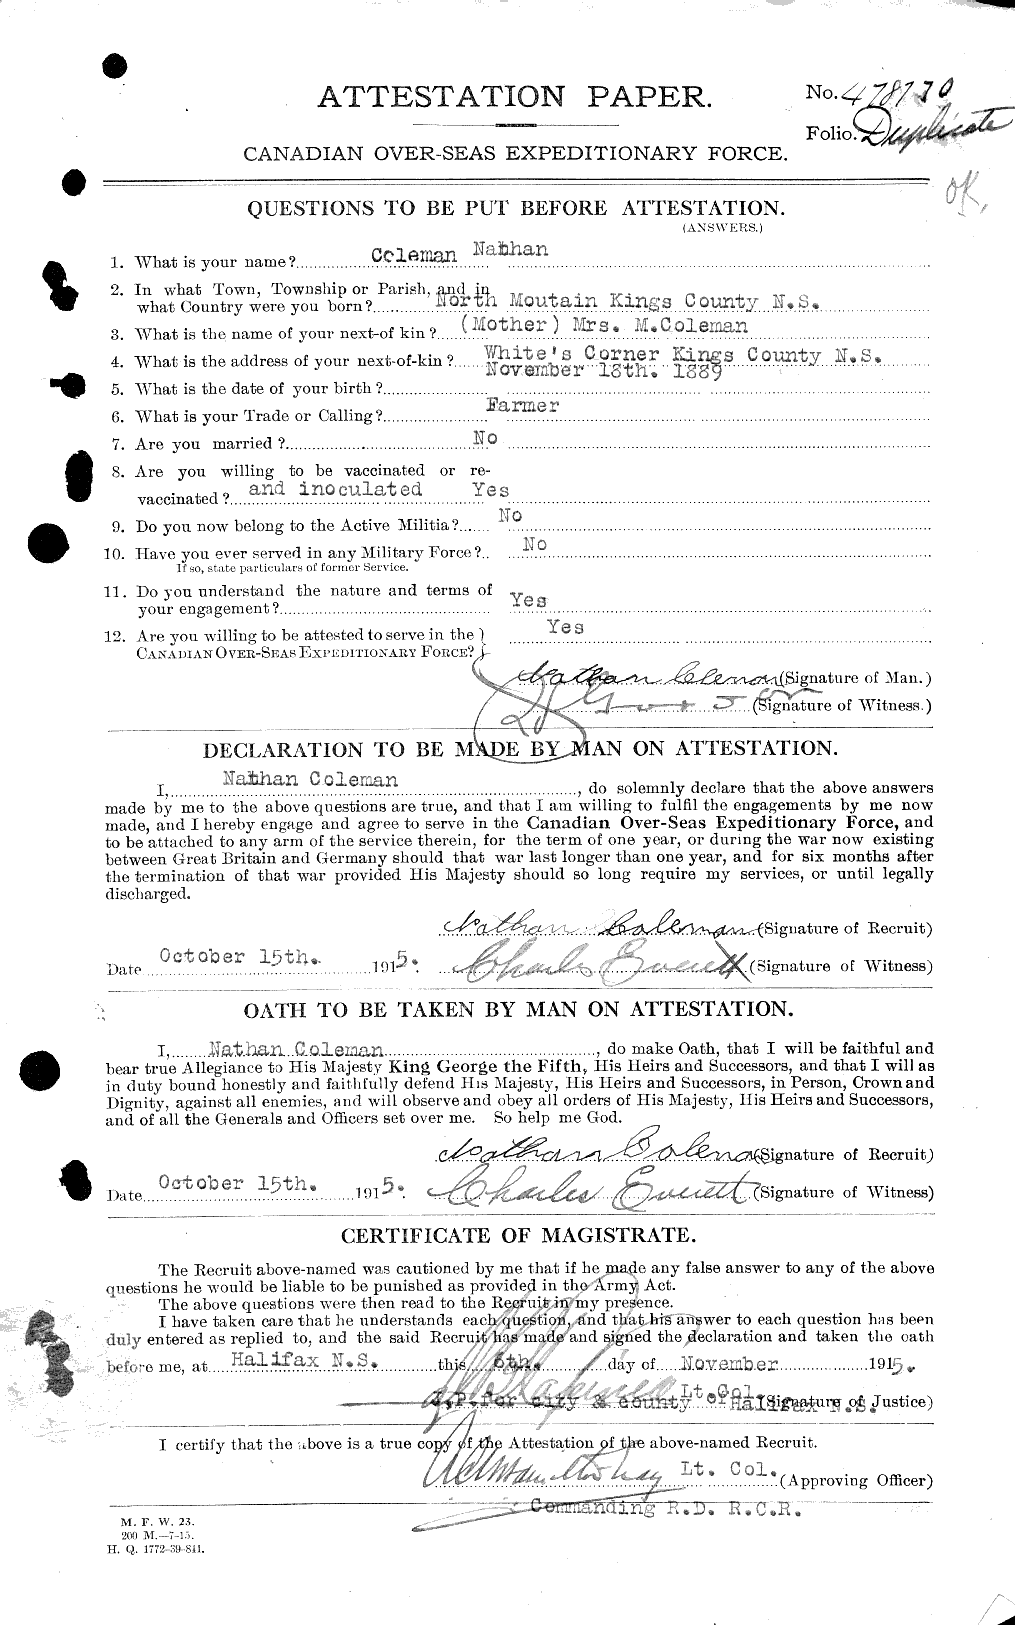 Personnel Records of the First World War - CEF 028244a